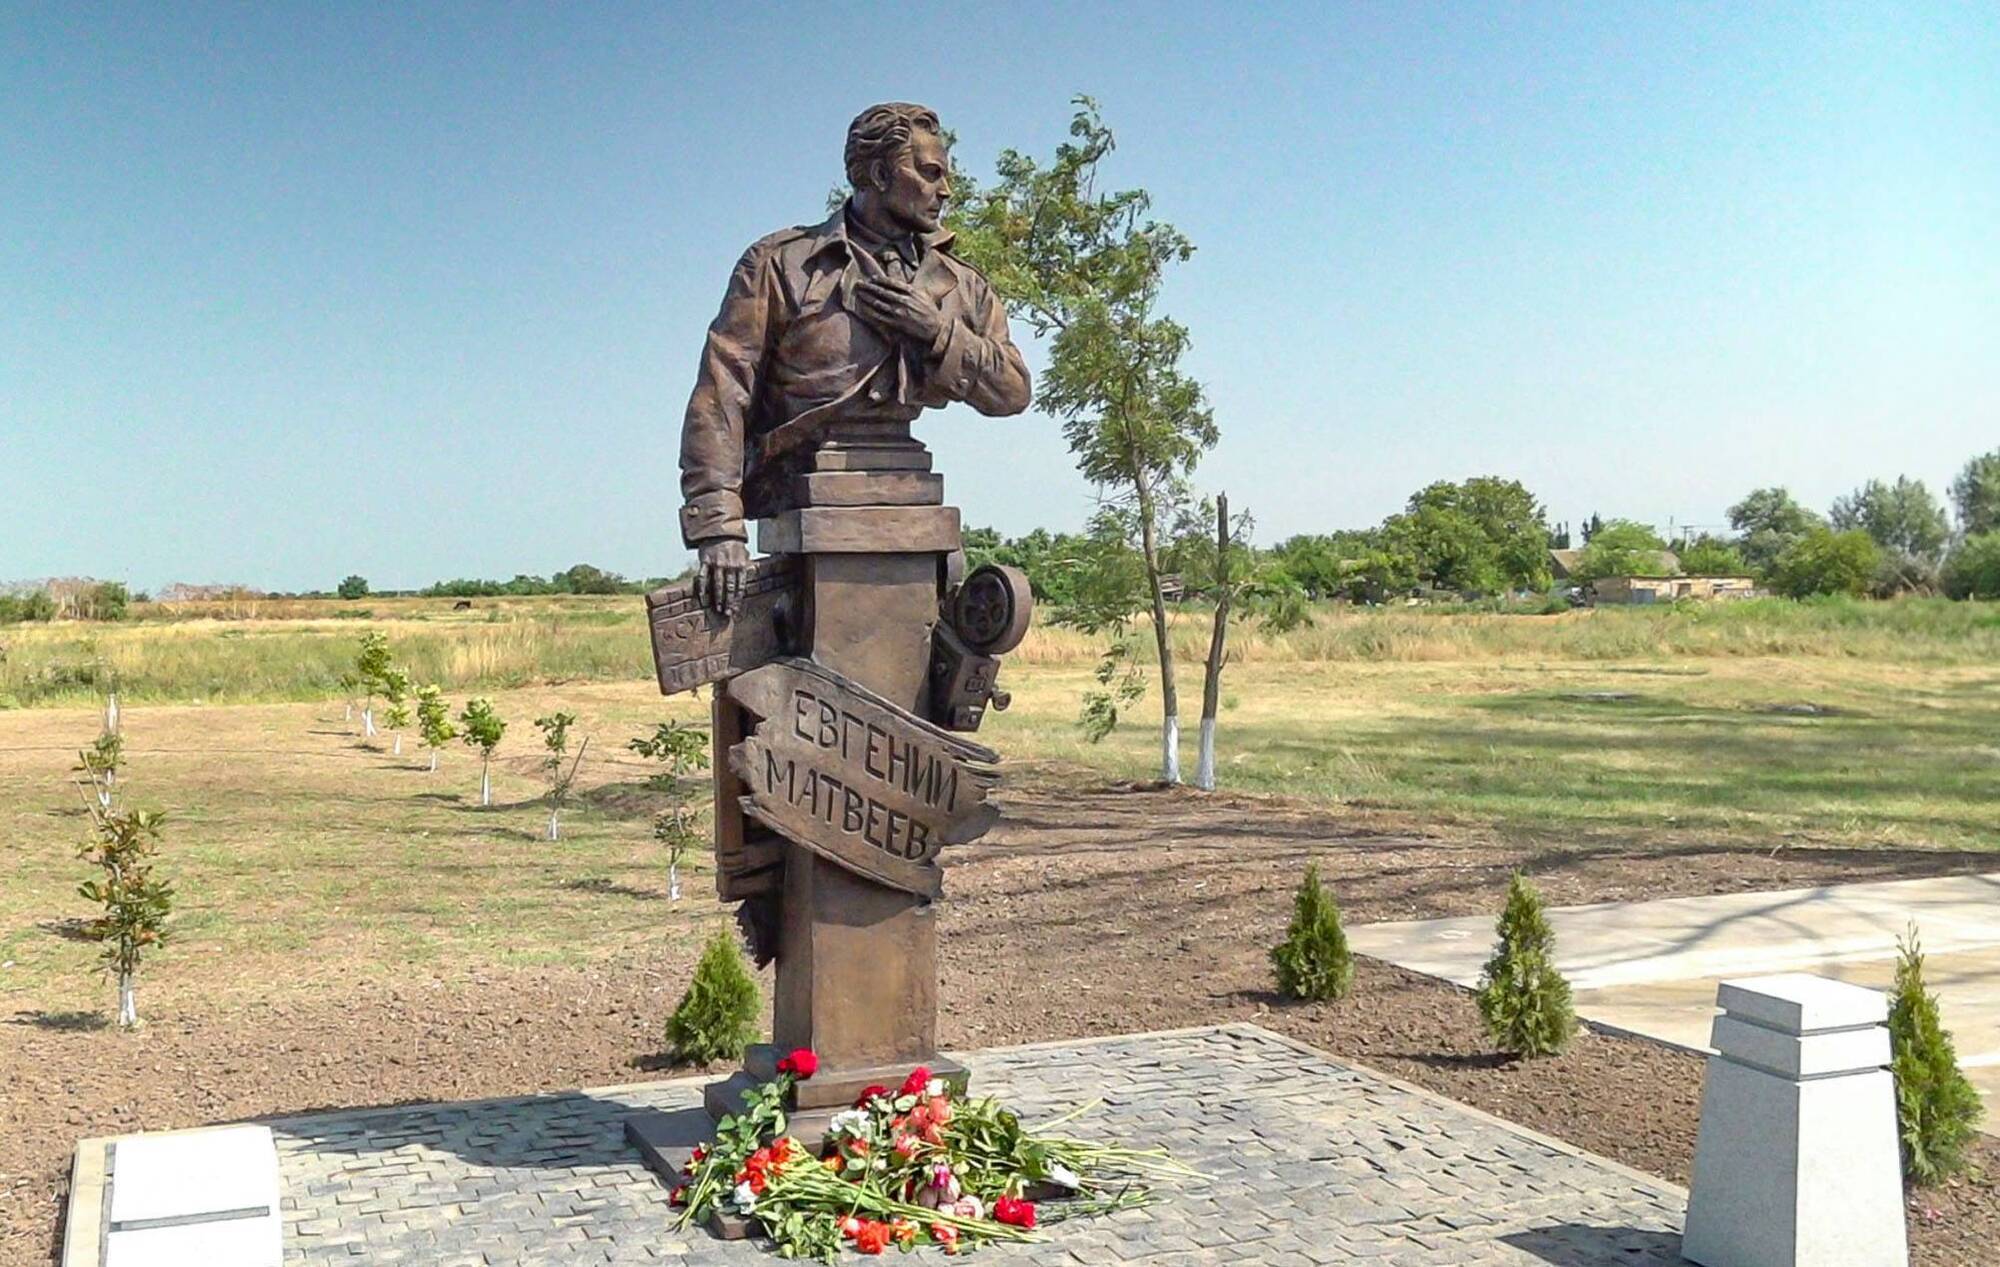 Russians unveil monument to director of ''Love in Russian'' film in occupied Kherson region